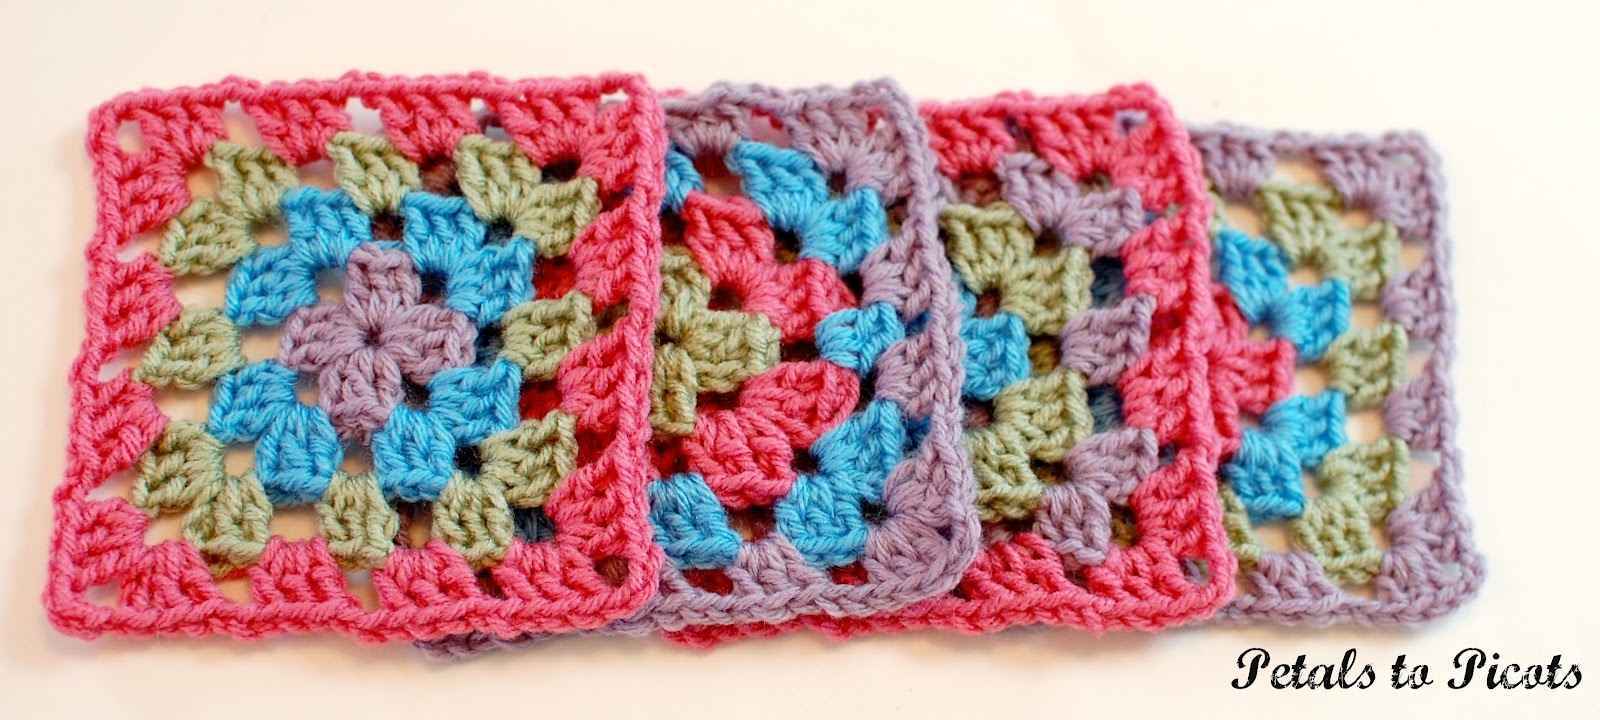 How To Crochet A Classic Granny Square: Granny Square Pattern - Free Printable Crochet Granny Square Patterns